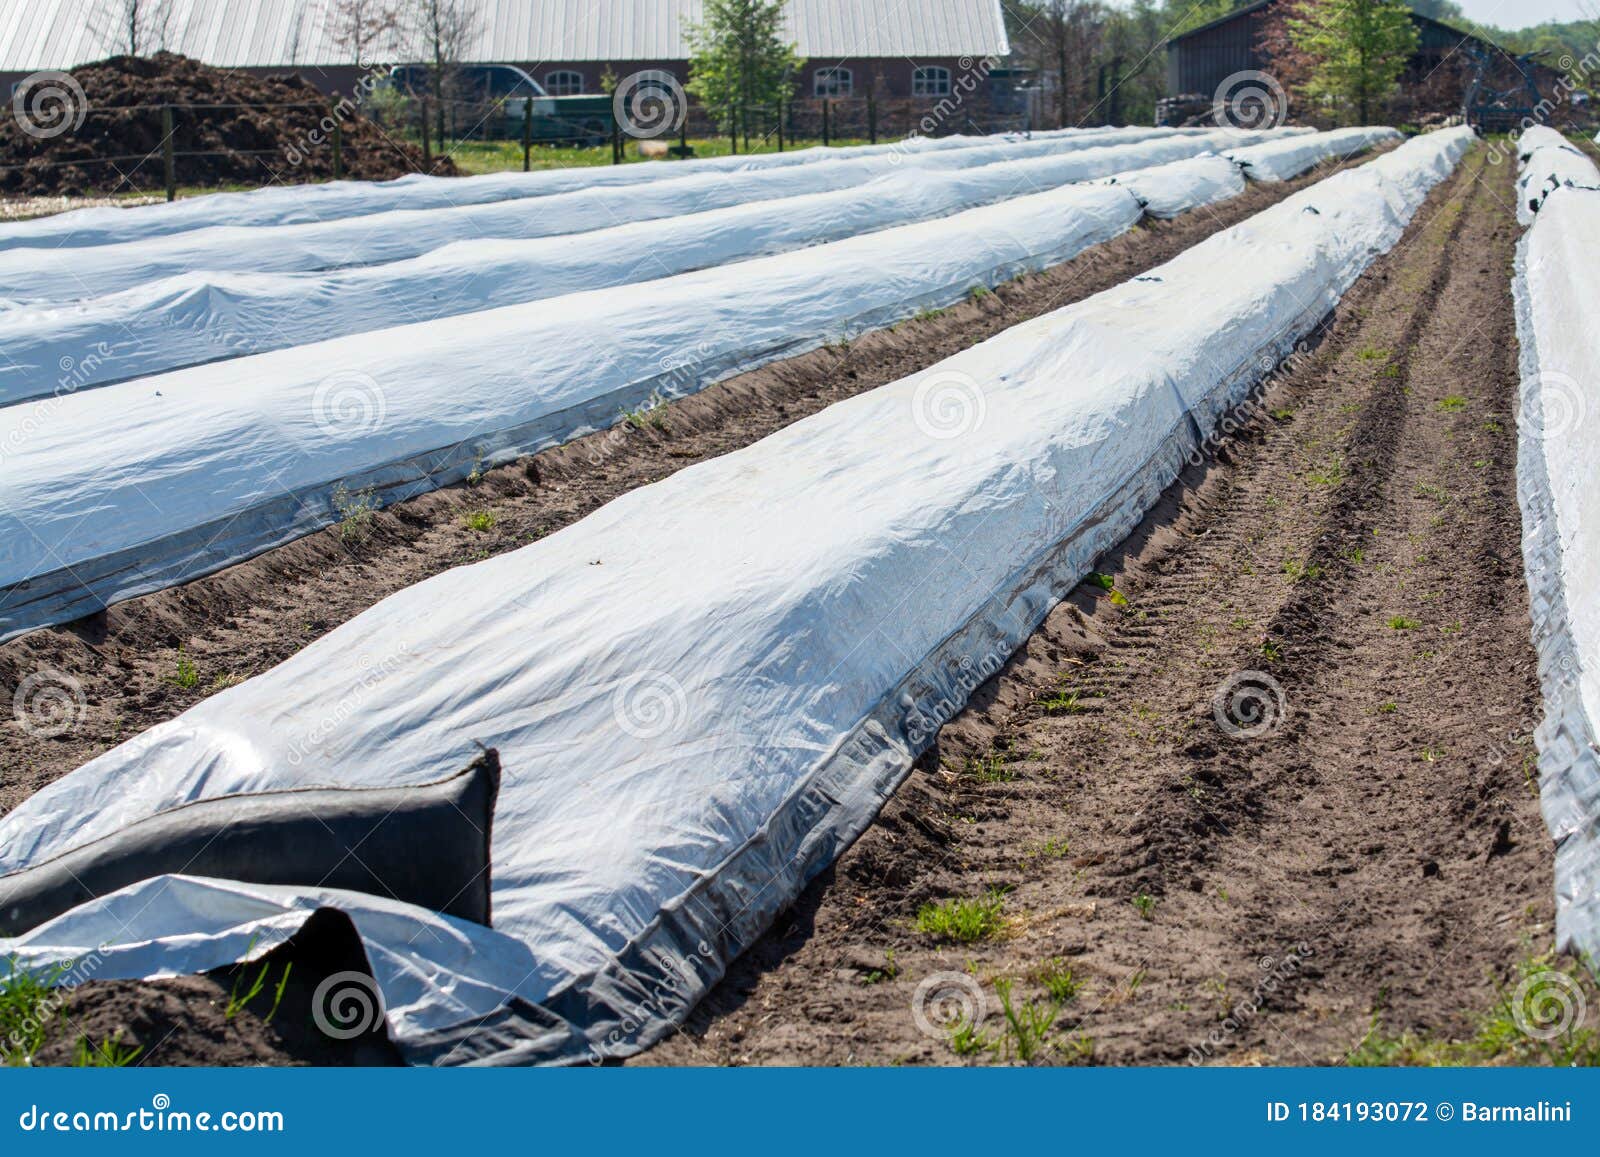 Rows Of White Asparagus Plants Growing Under Plastic Film On Small Farm Stock Photo Image Of Healthy Growing 184193072,Transplanting Yucca